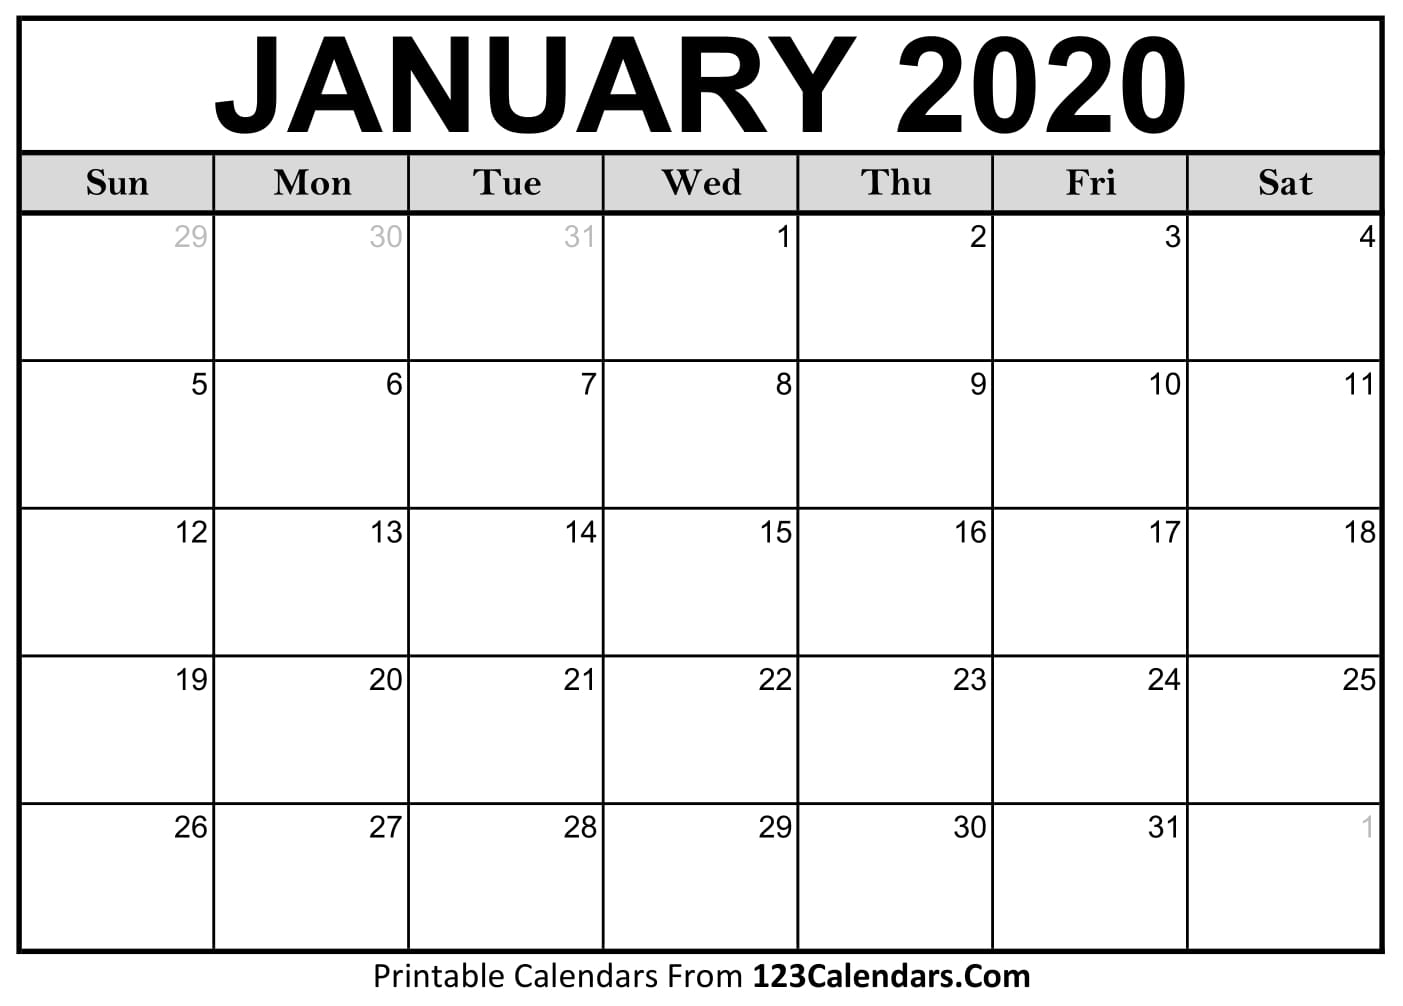 January Monthly Calendar 2020  Bolan.horizonconsulting.co in Calendar 2020 January